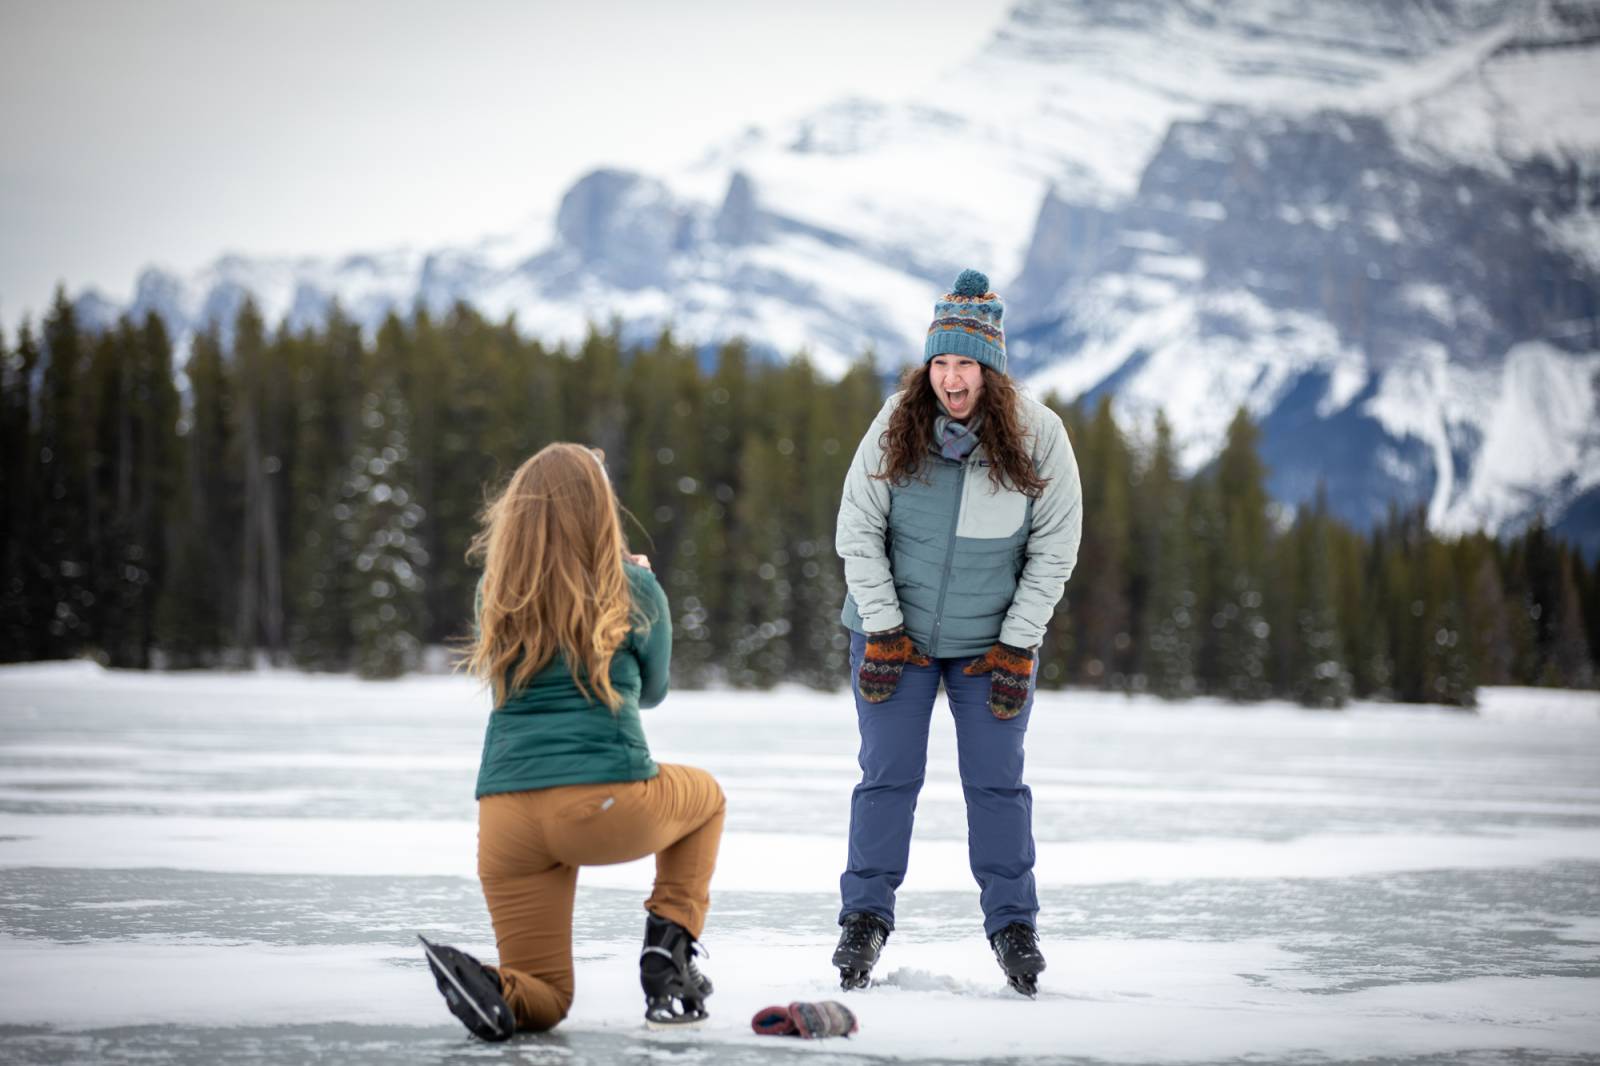 Banff Engagement Photographers, Canmore Engagement Photographers, Surprise proposal photographers